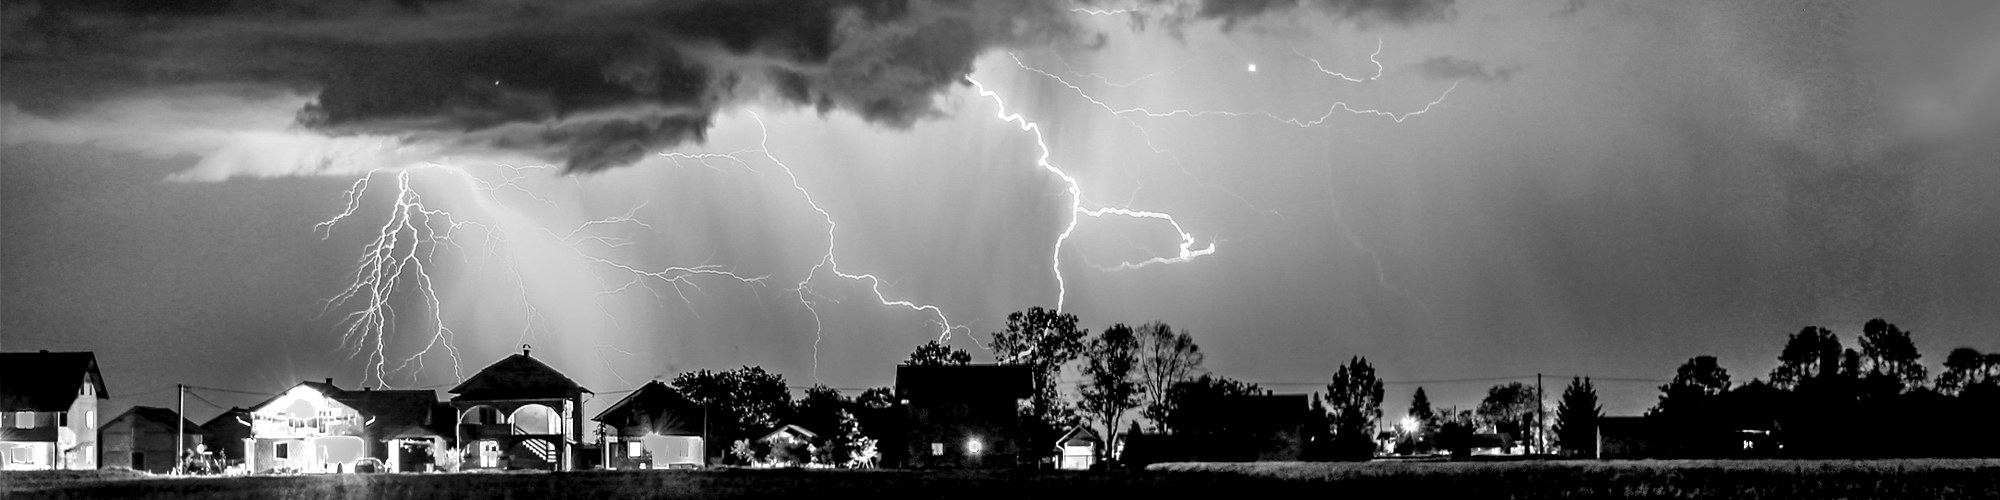 Houses with lightning in the background.